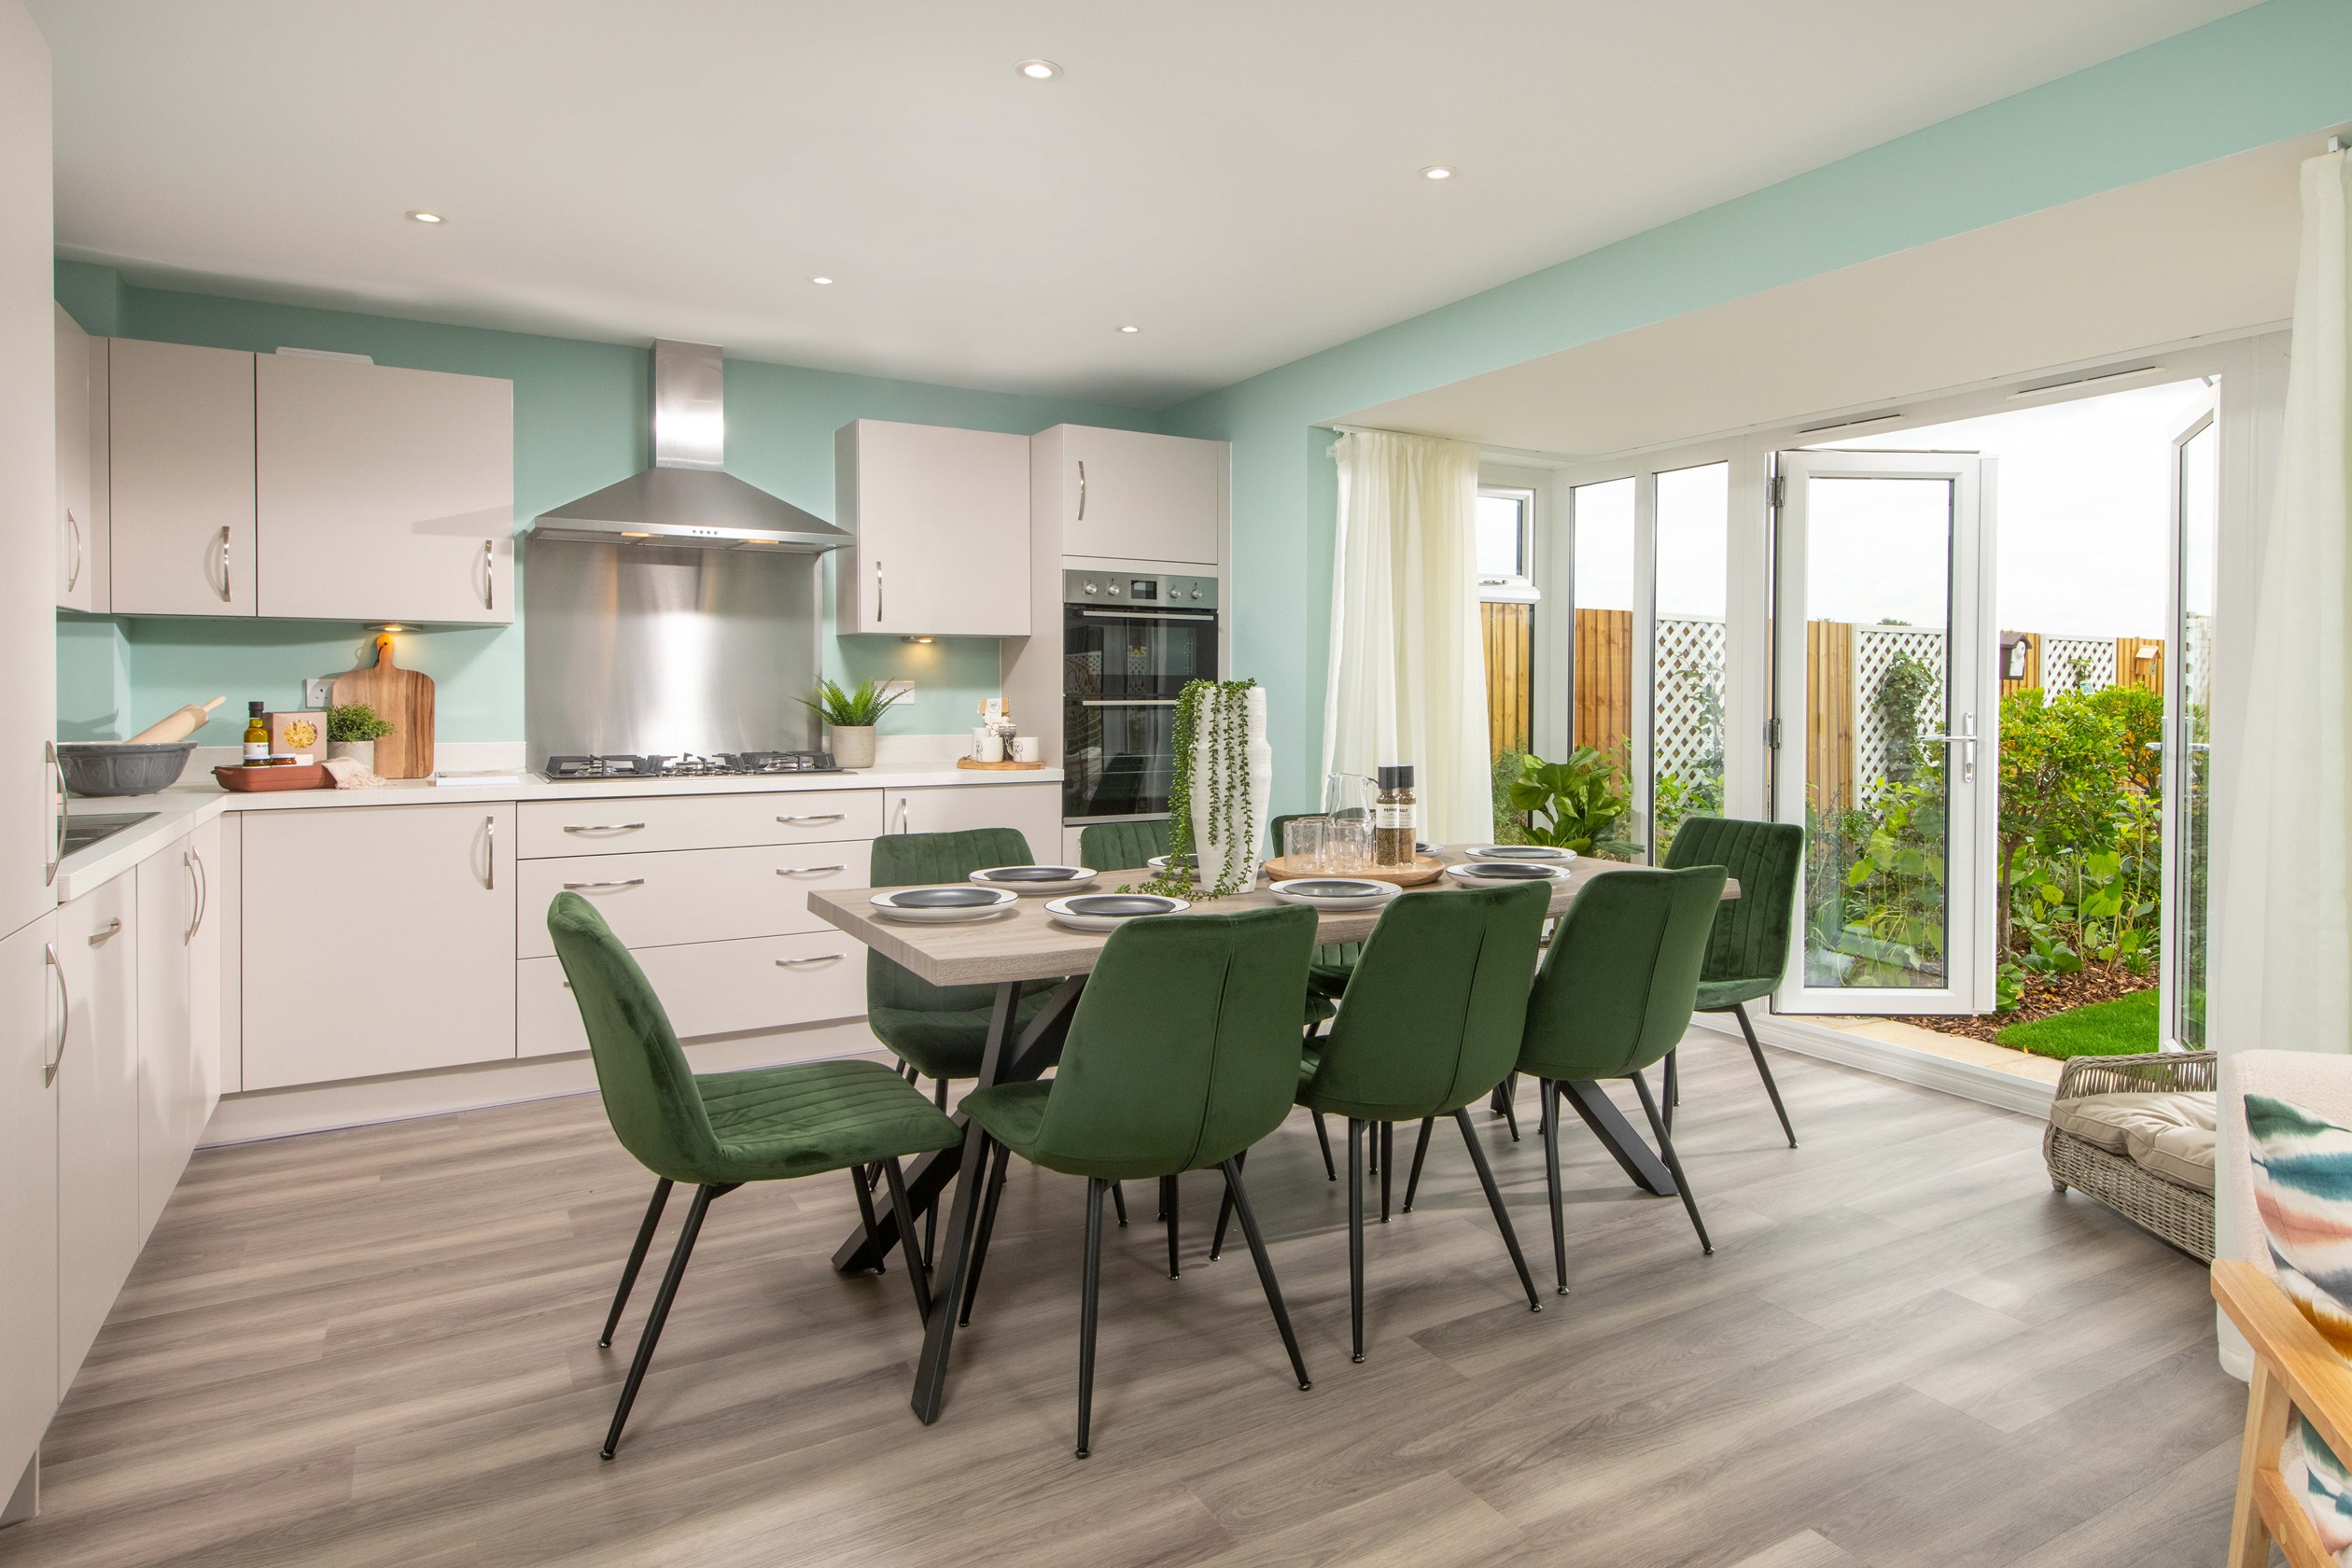 Property 2 of 10. Open-Plan Kitchen-Diner With French Doors